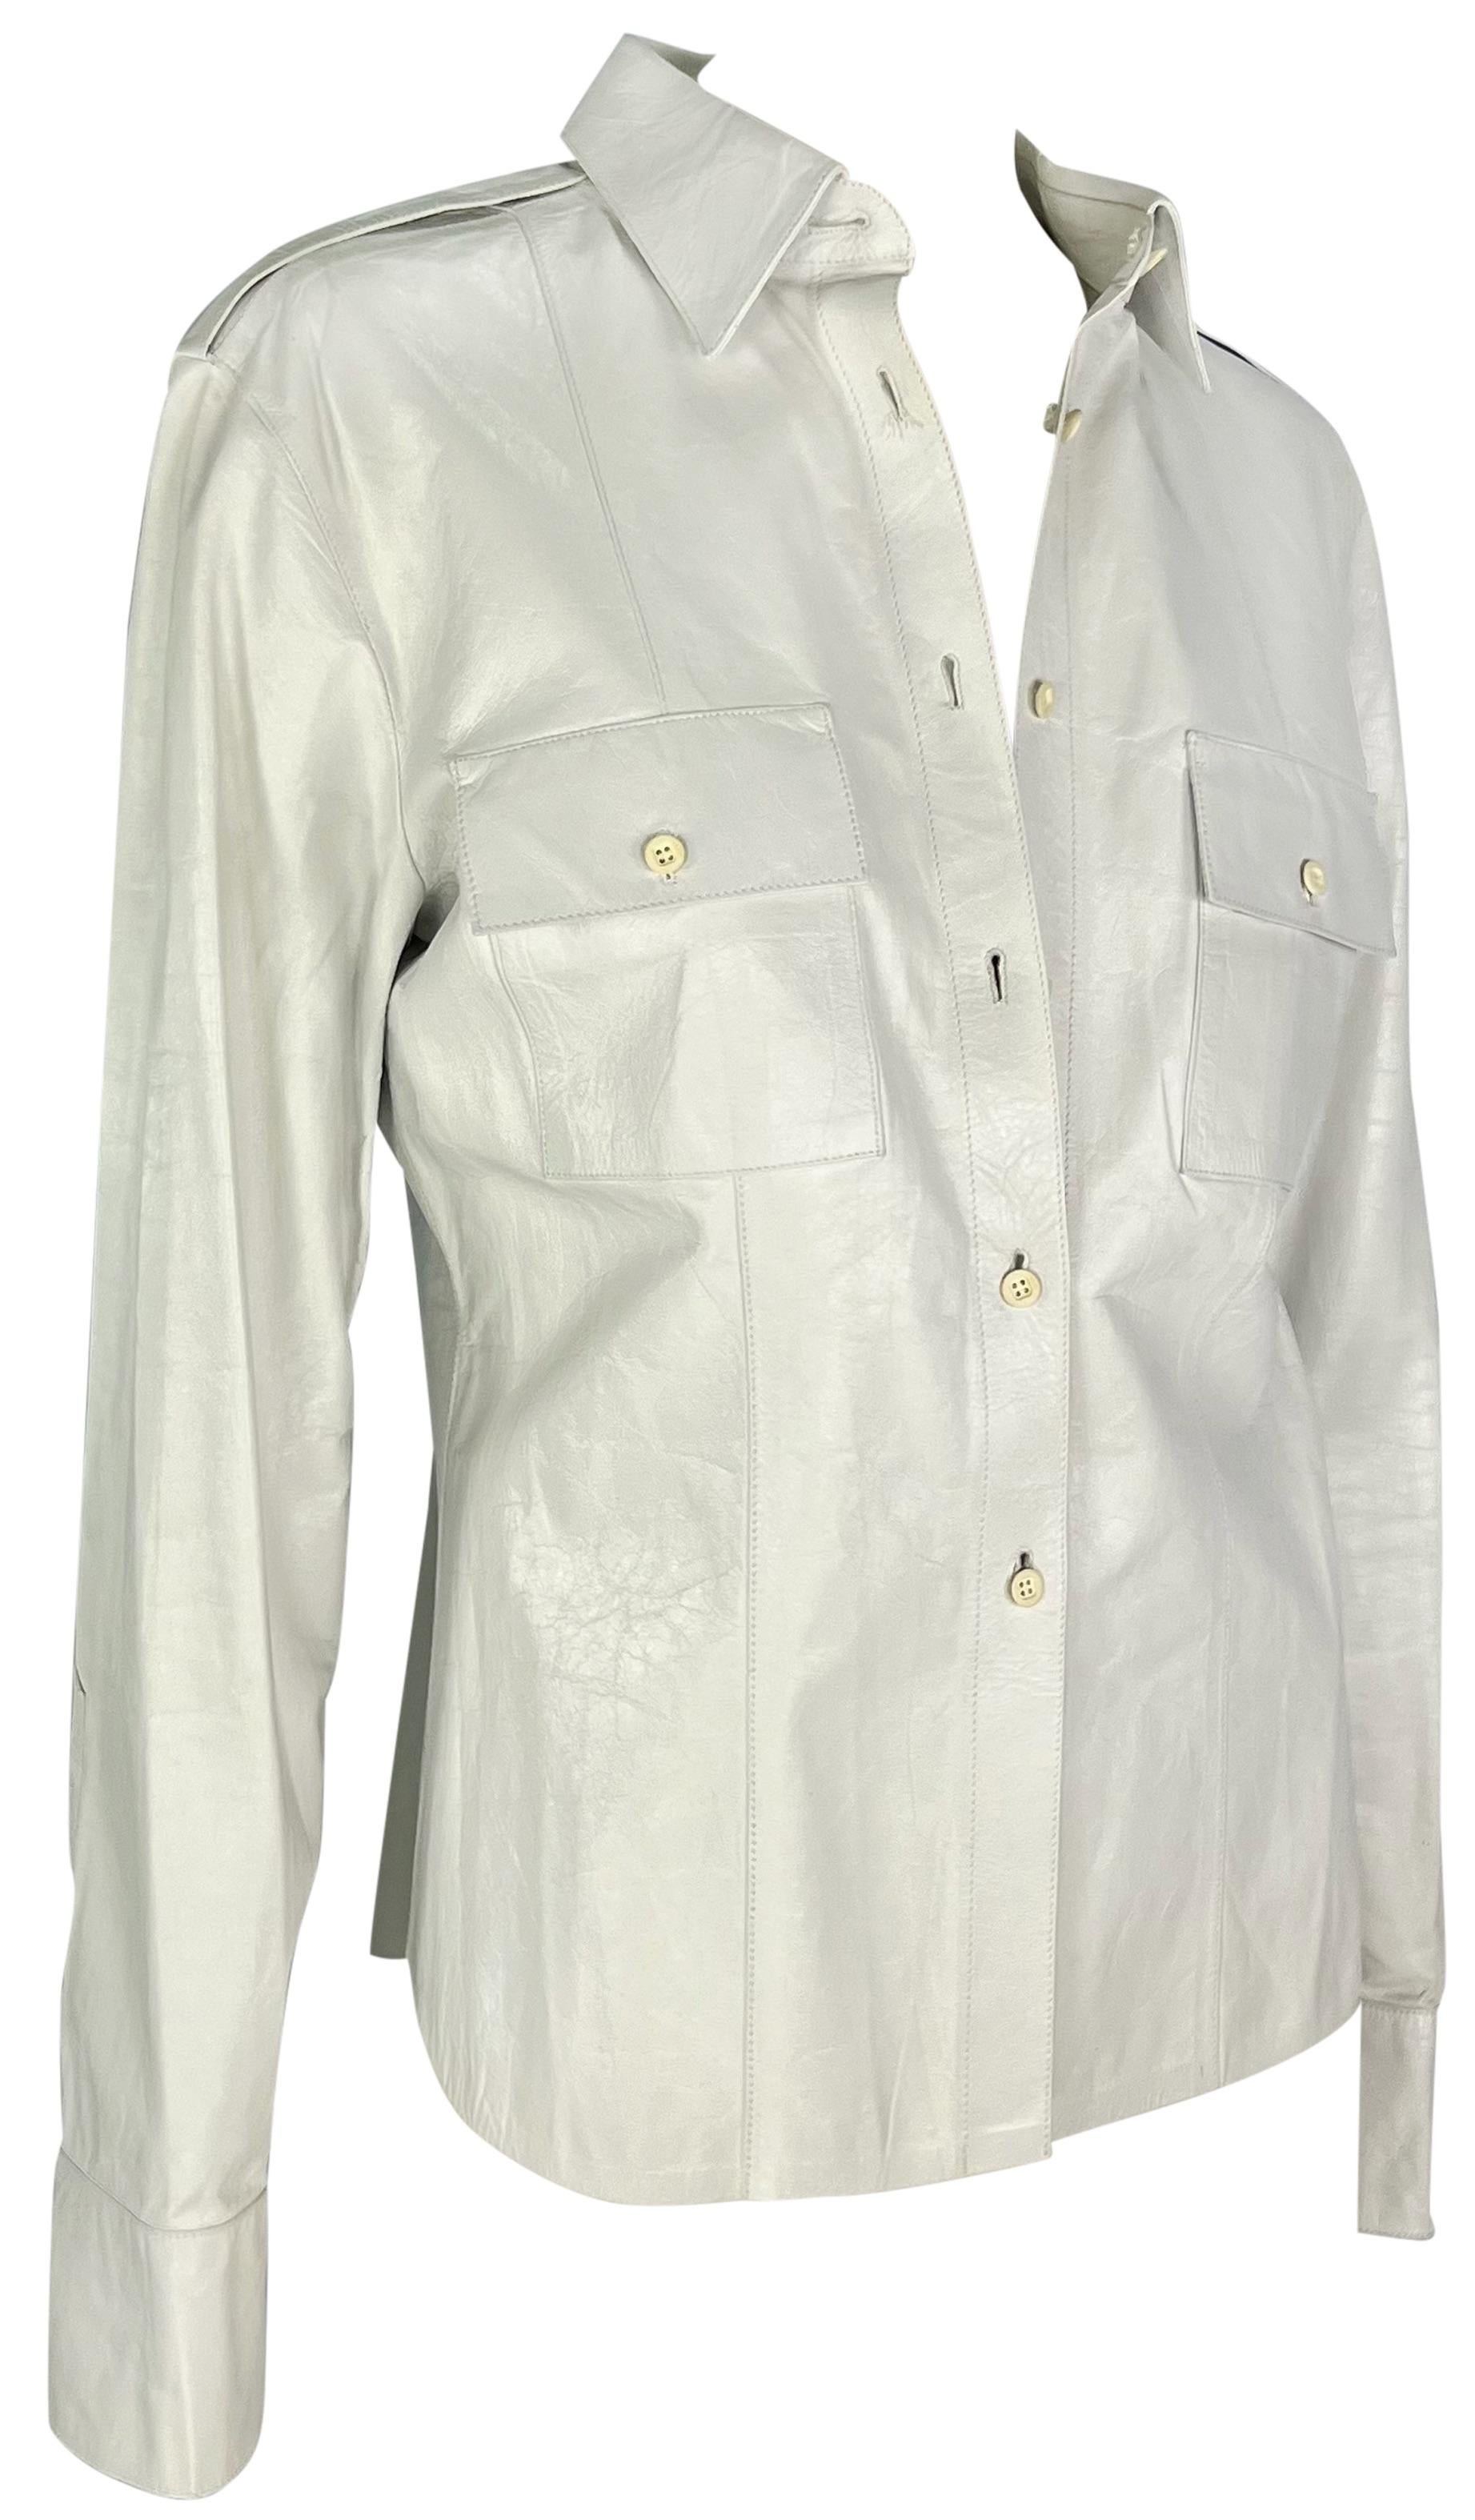 S/S 2001 Gucci by Tom Ford White Leather Button Down Shirt For Sale 2